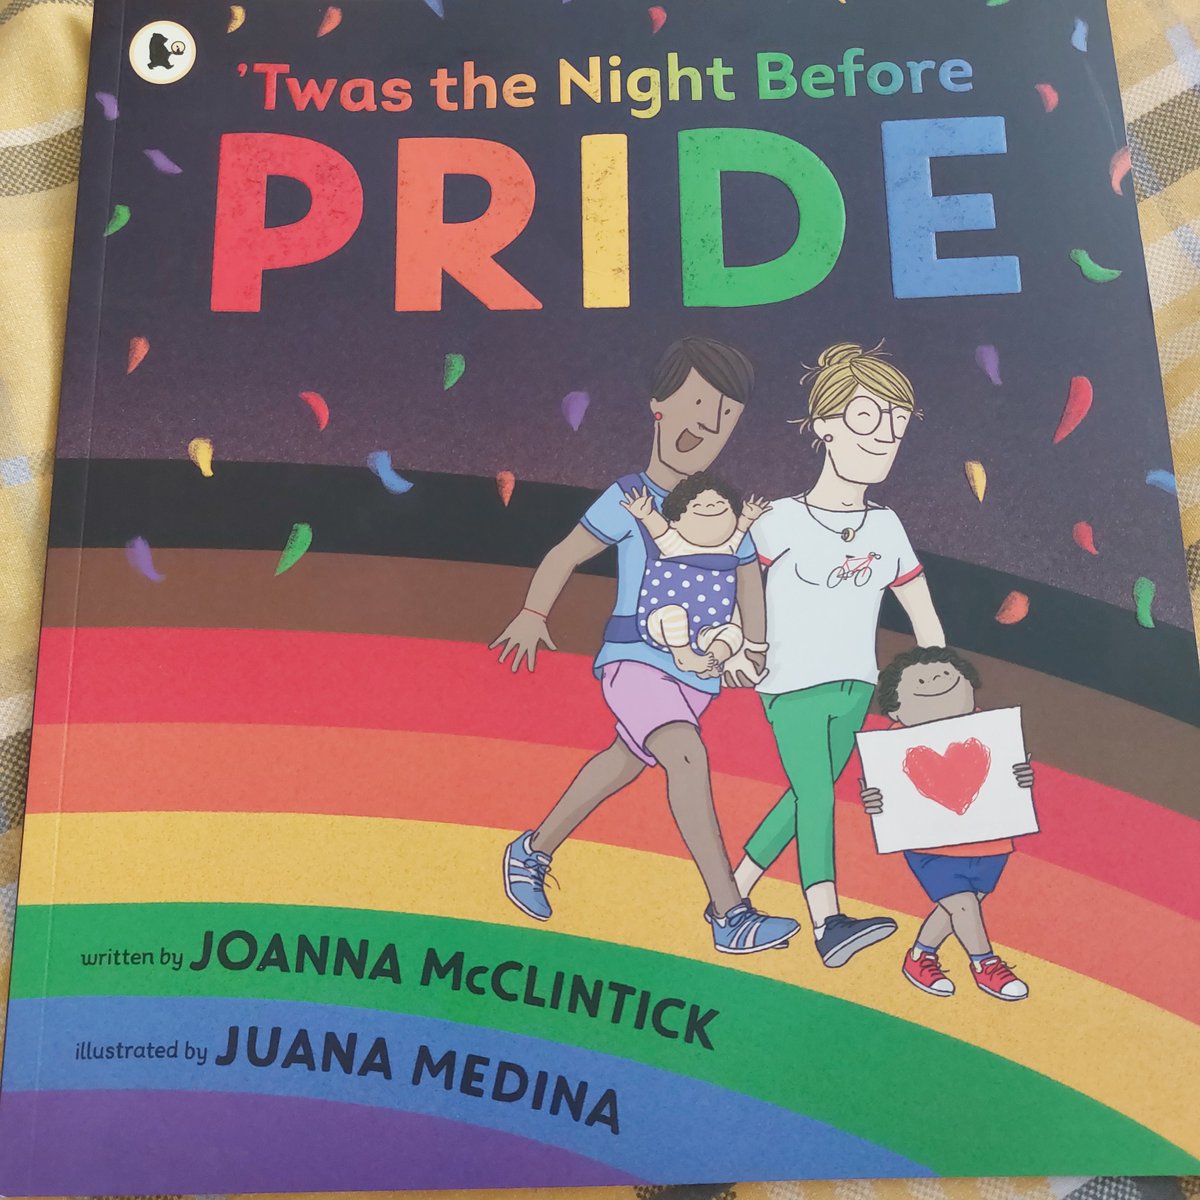 My kids' dad got a lovely book for them. (and me🥰)
Thank you for such a fabulous book @jmc_clintick @juanamedina ❤️🌈

#PrideMonth